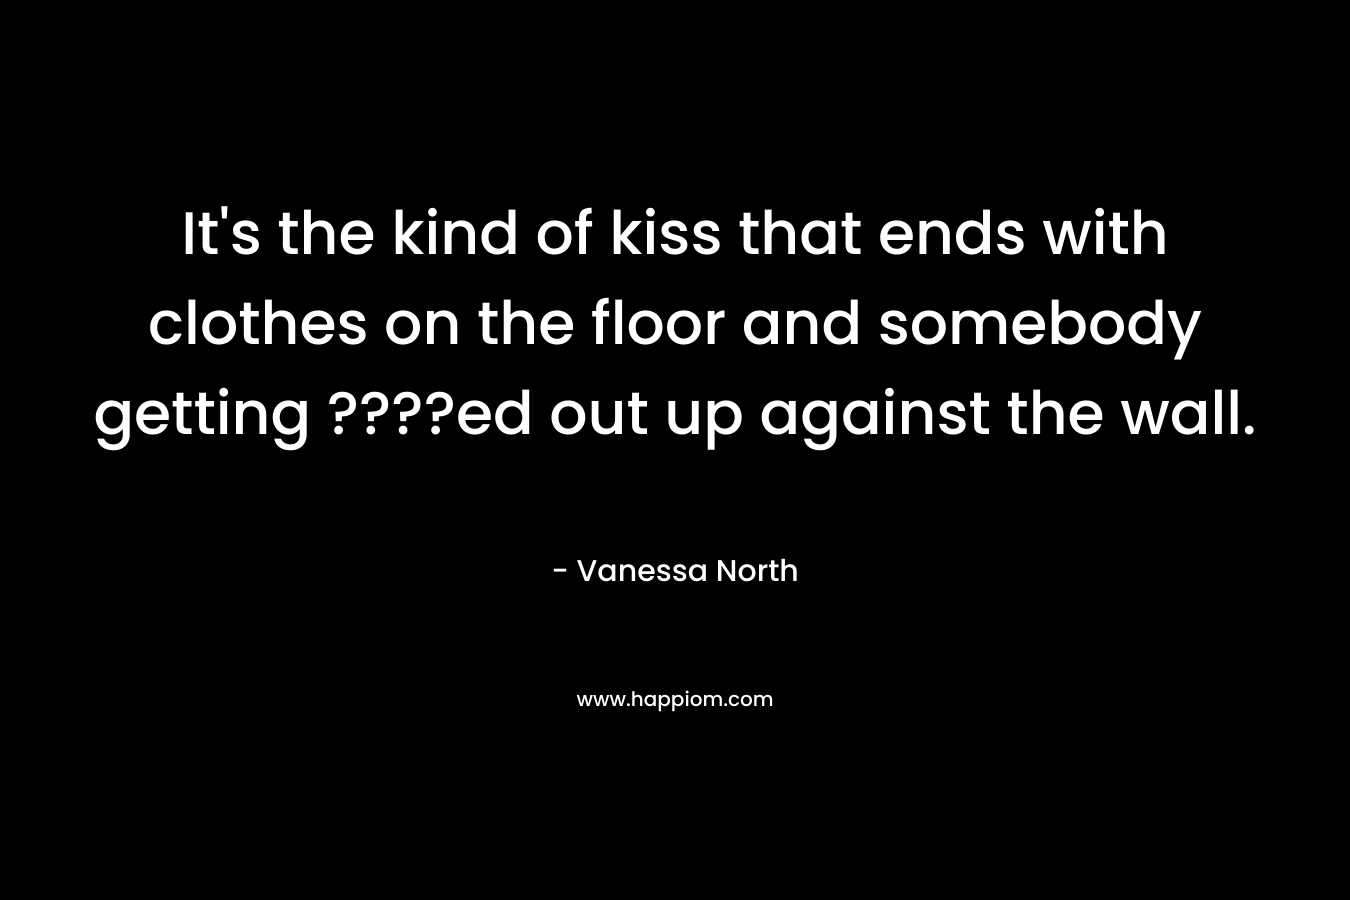 It’s the kind of kiss that ends with clothes on the floor and somebody getting ????ed out up against the wall. – Vanessa North